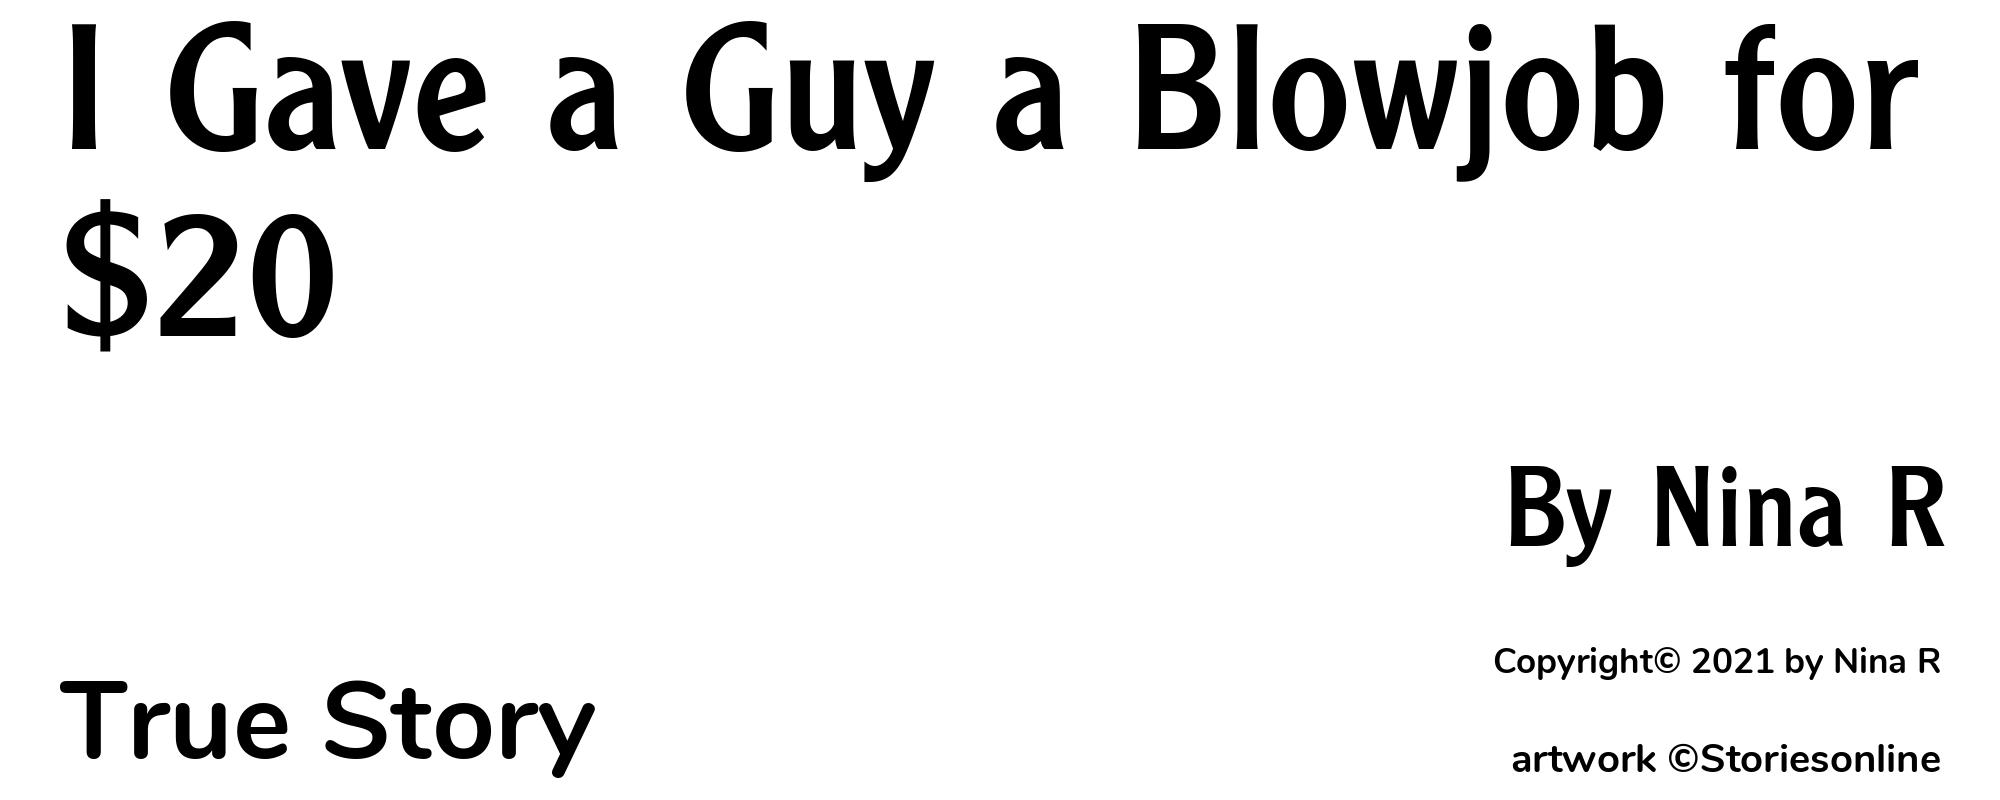 I Gave a Guy a Blowjob for $20 - Cover